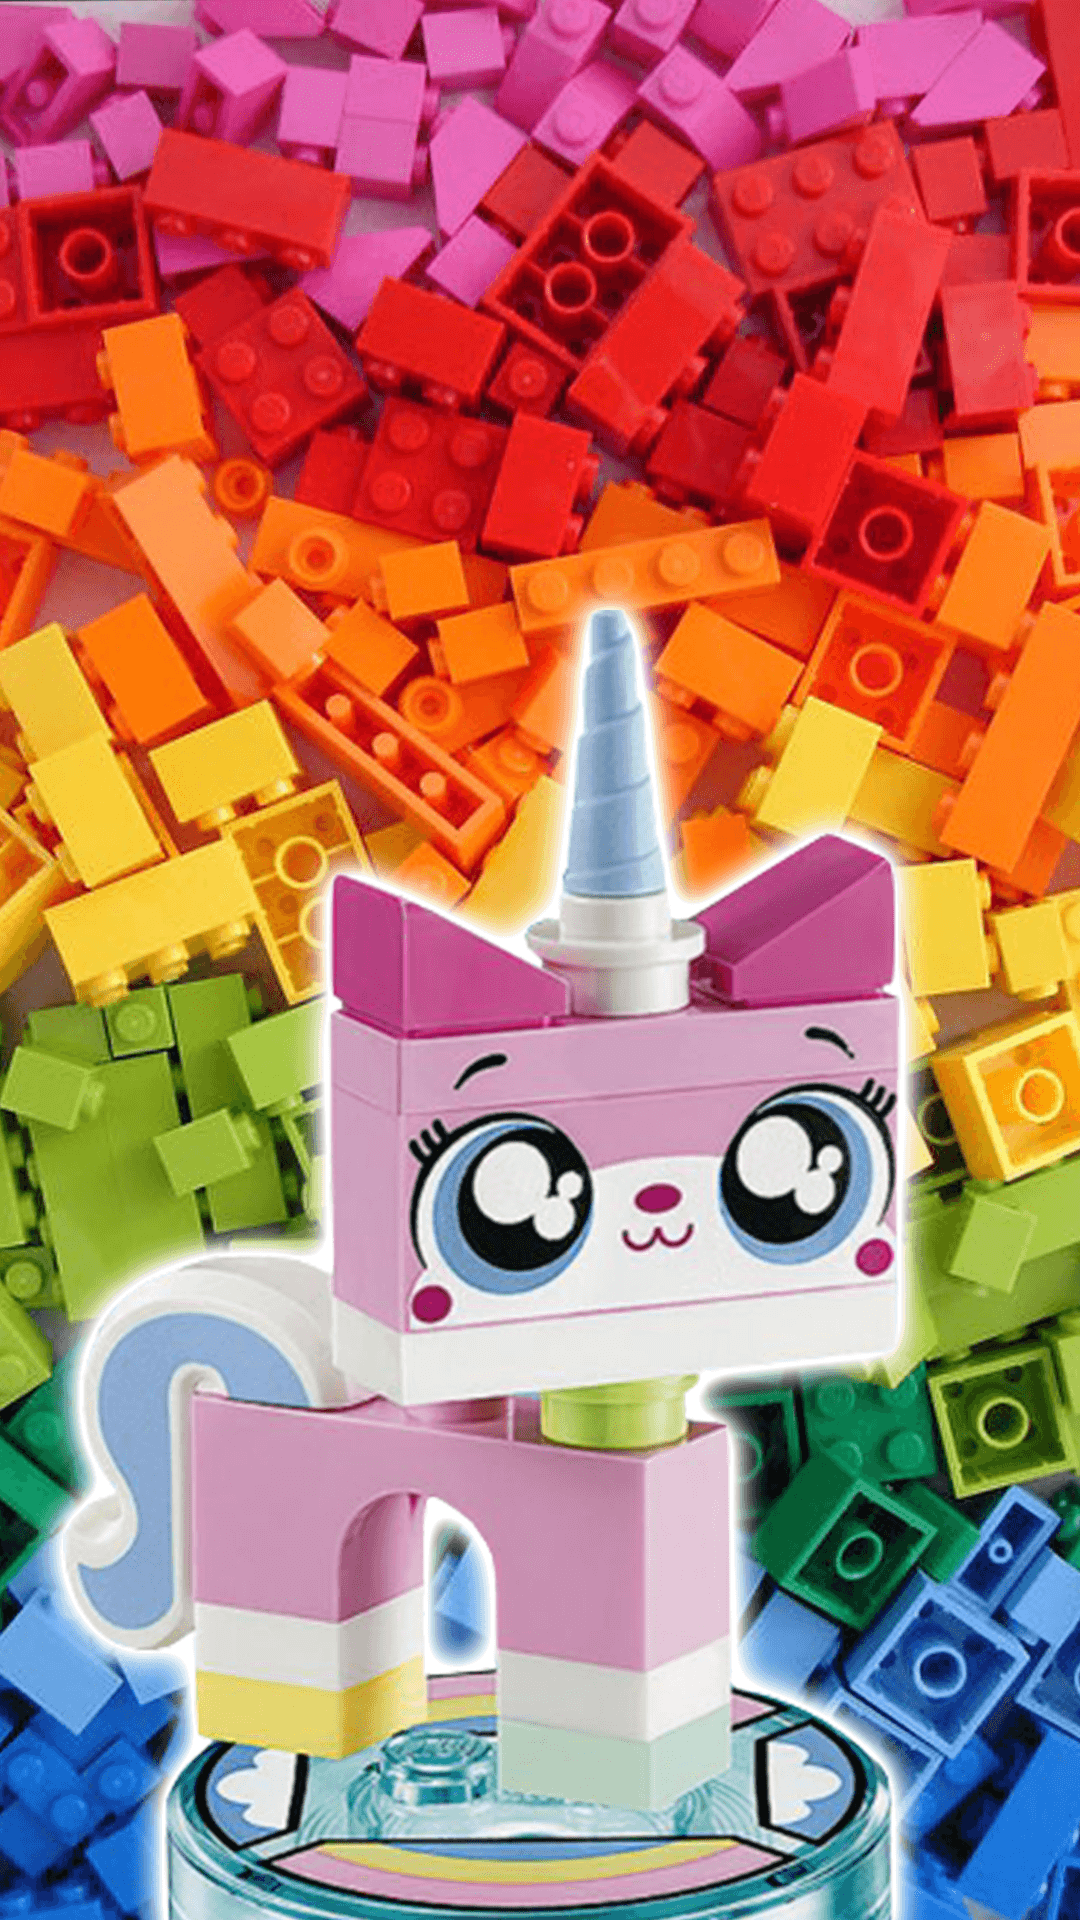 Mobile Lego Dimensions Wallpaper Gallery To Life